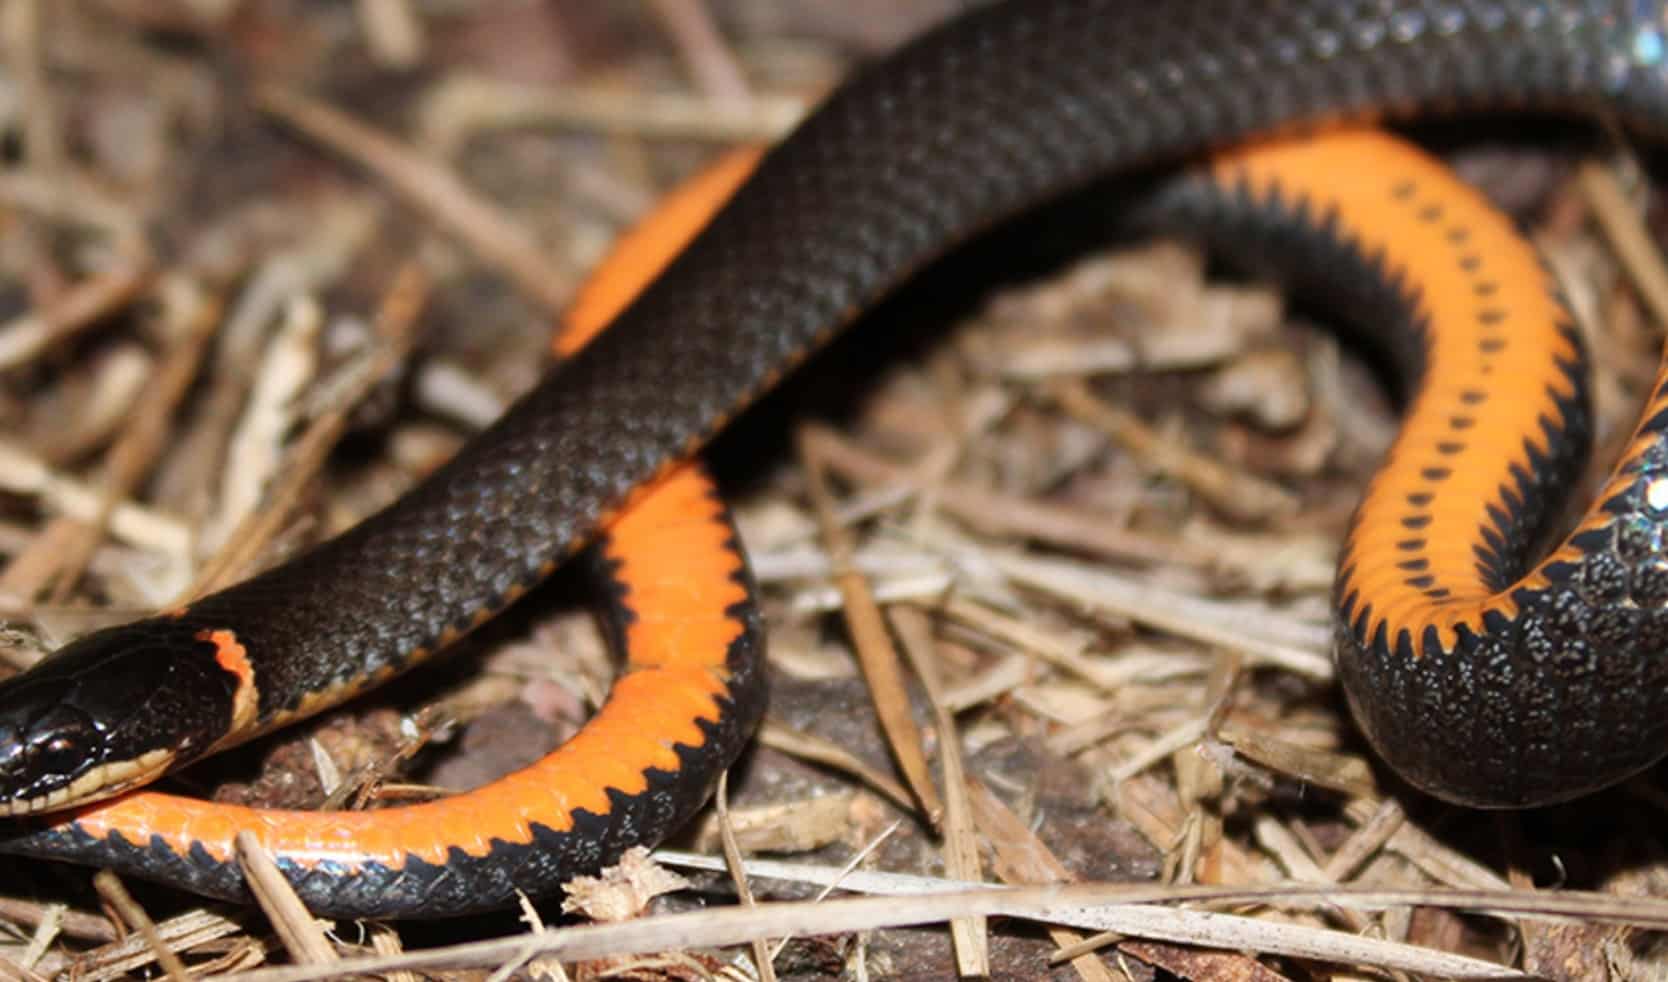 Southern Ringneck Snake in straw